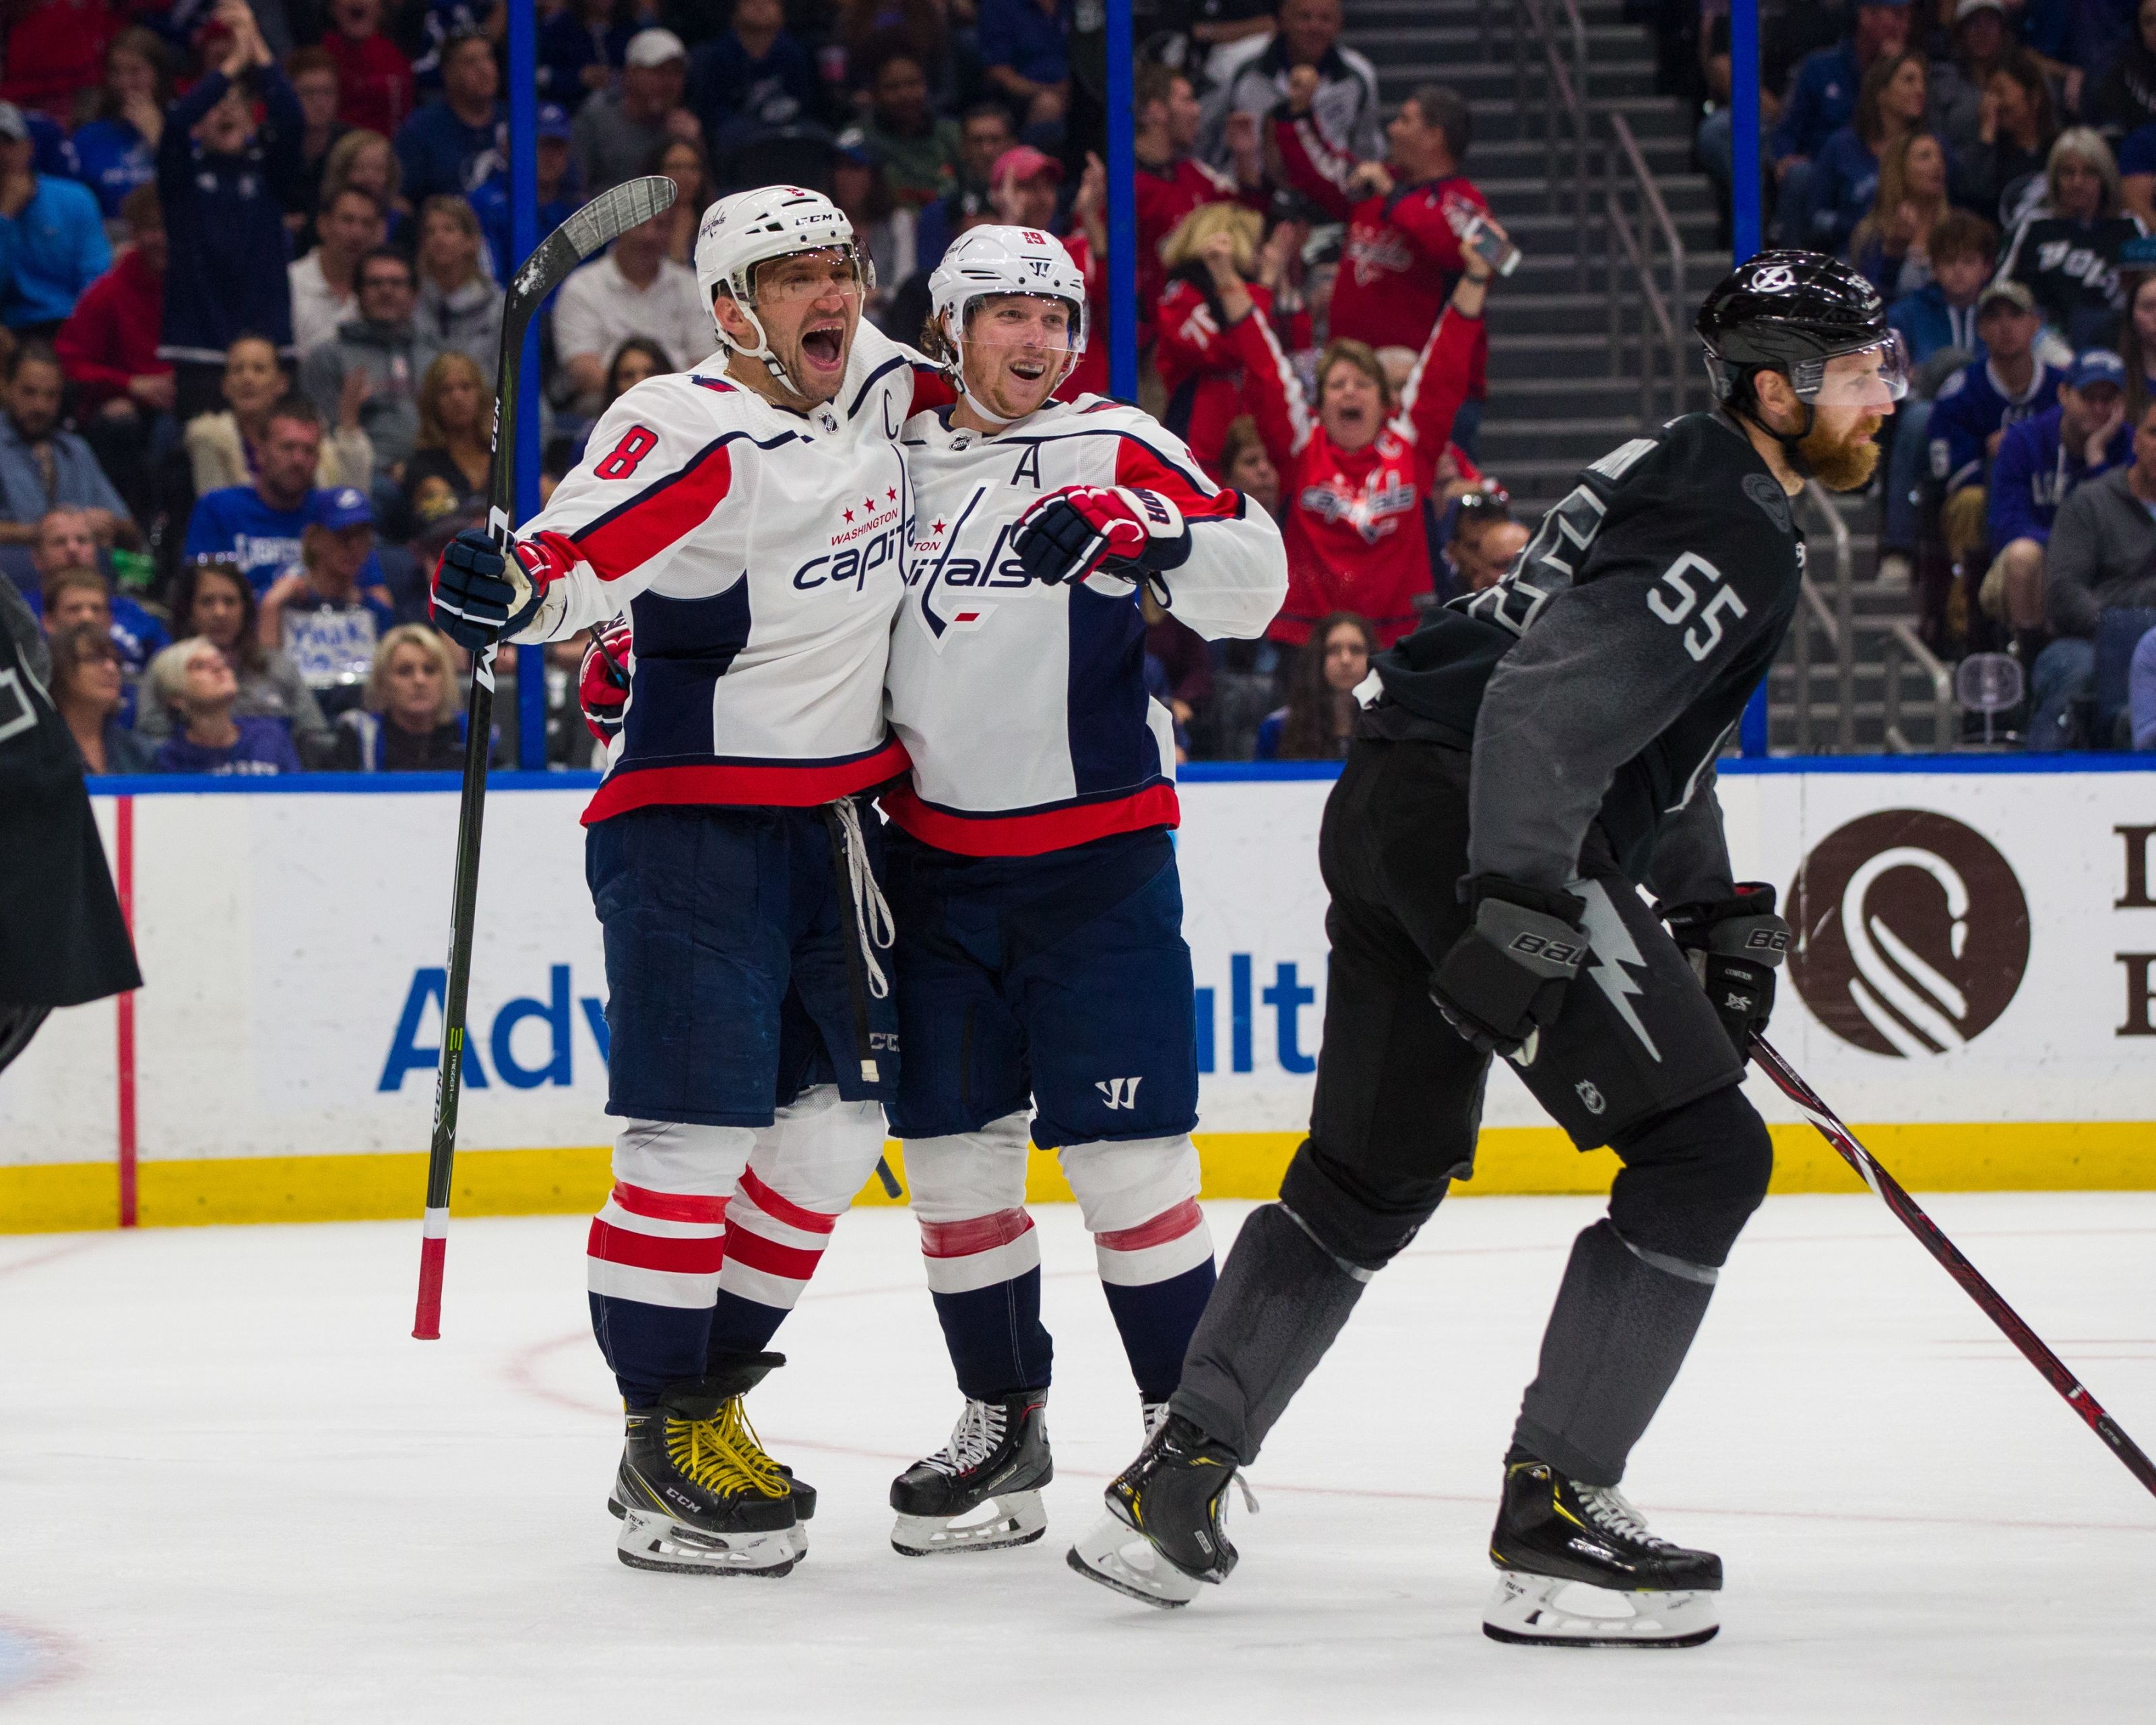 Capitals: Top 3 key players to watch against Lightning